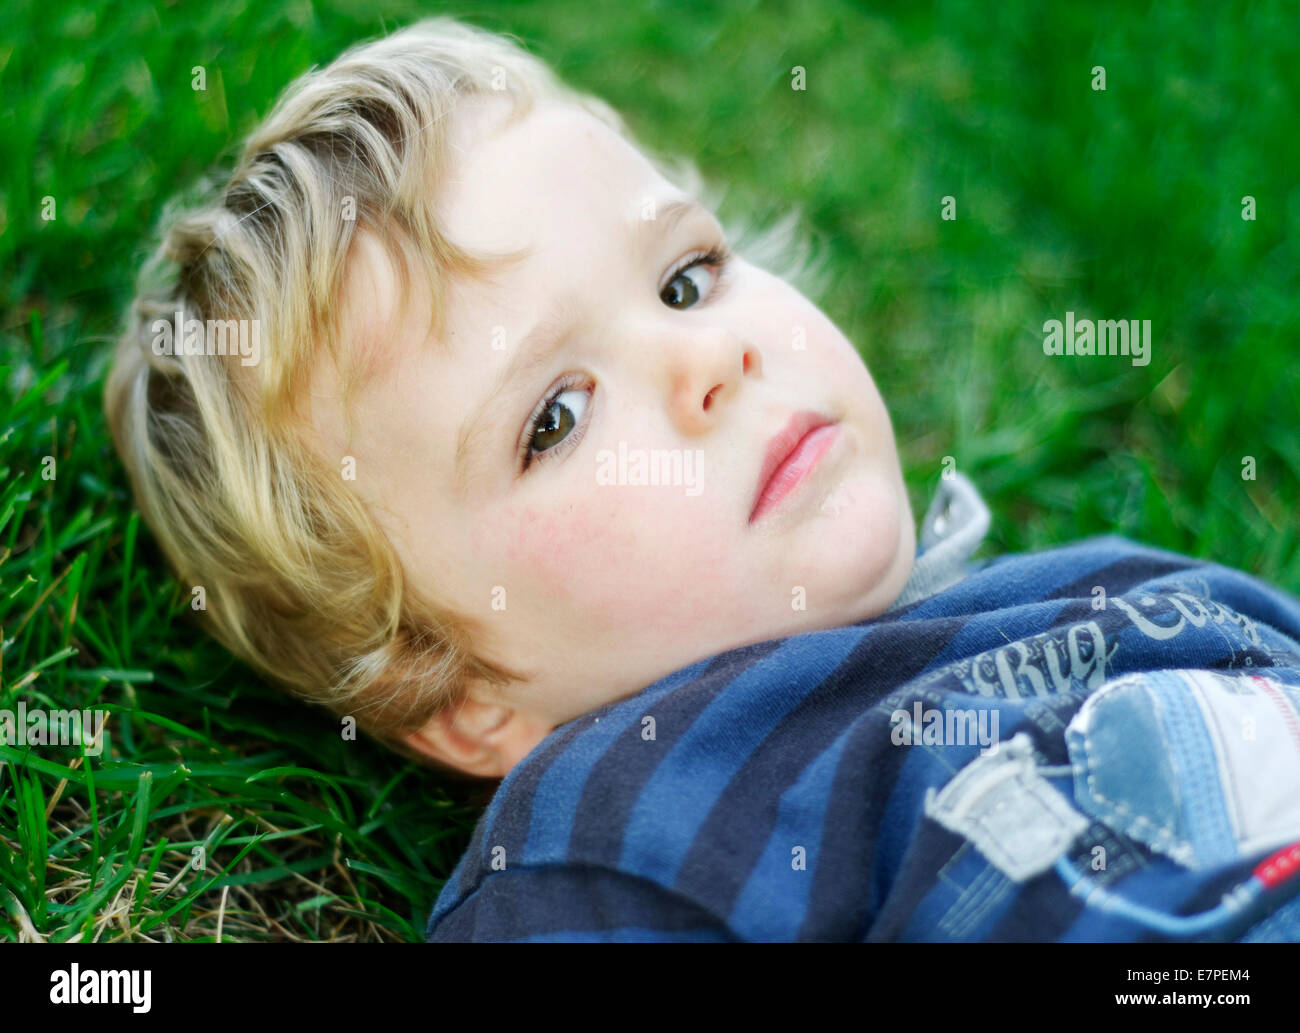 Portrait of a young boy (2 1/2 yrs old) lying on grass Stock Photo